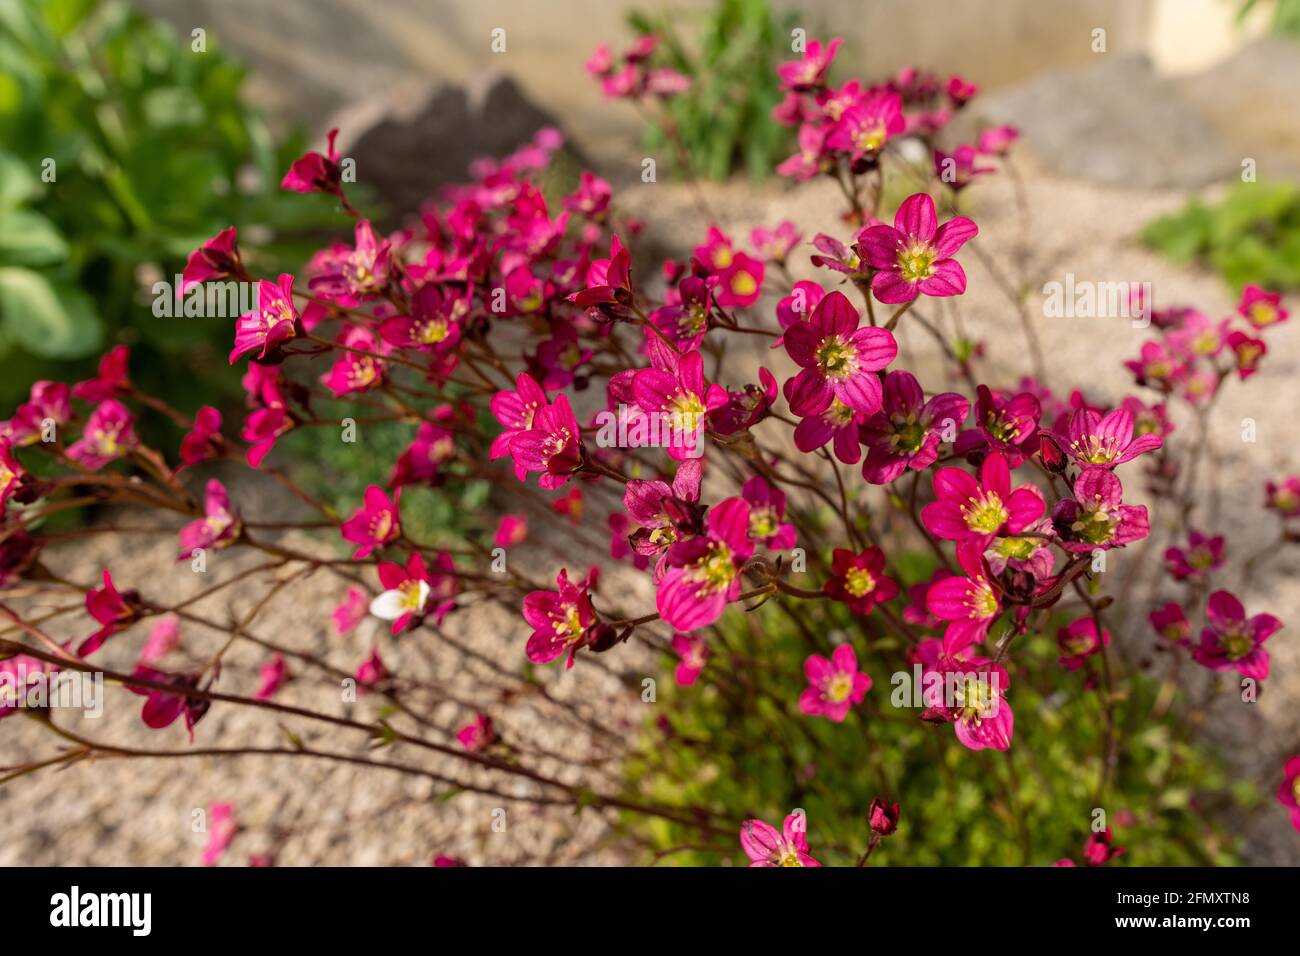 Saxifraga arendsii. Blooming saxifraga in rock garden. Rockery with small pretty pink flowers, nature background. Stock Photo